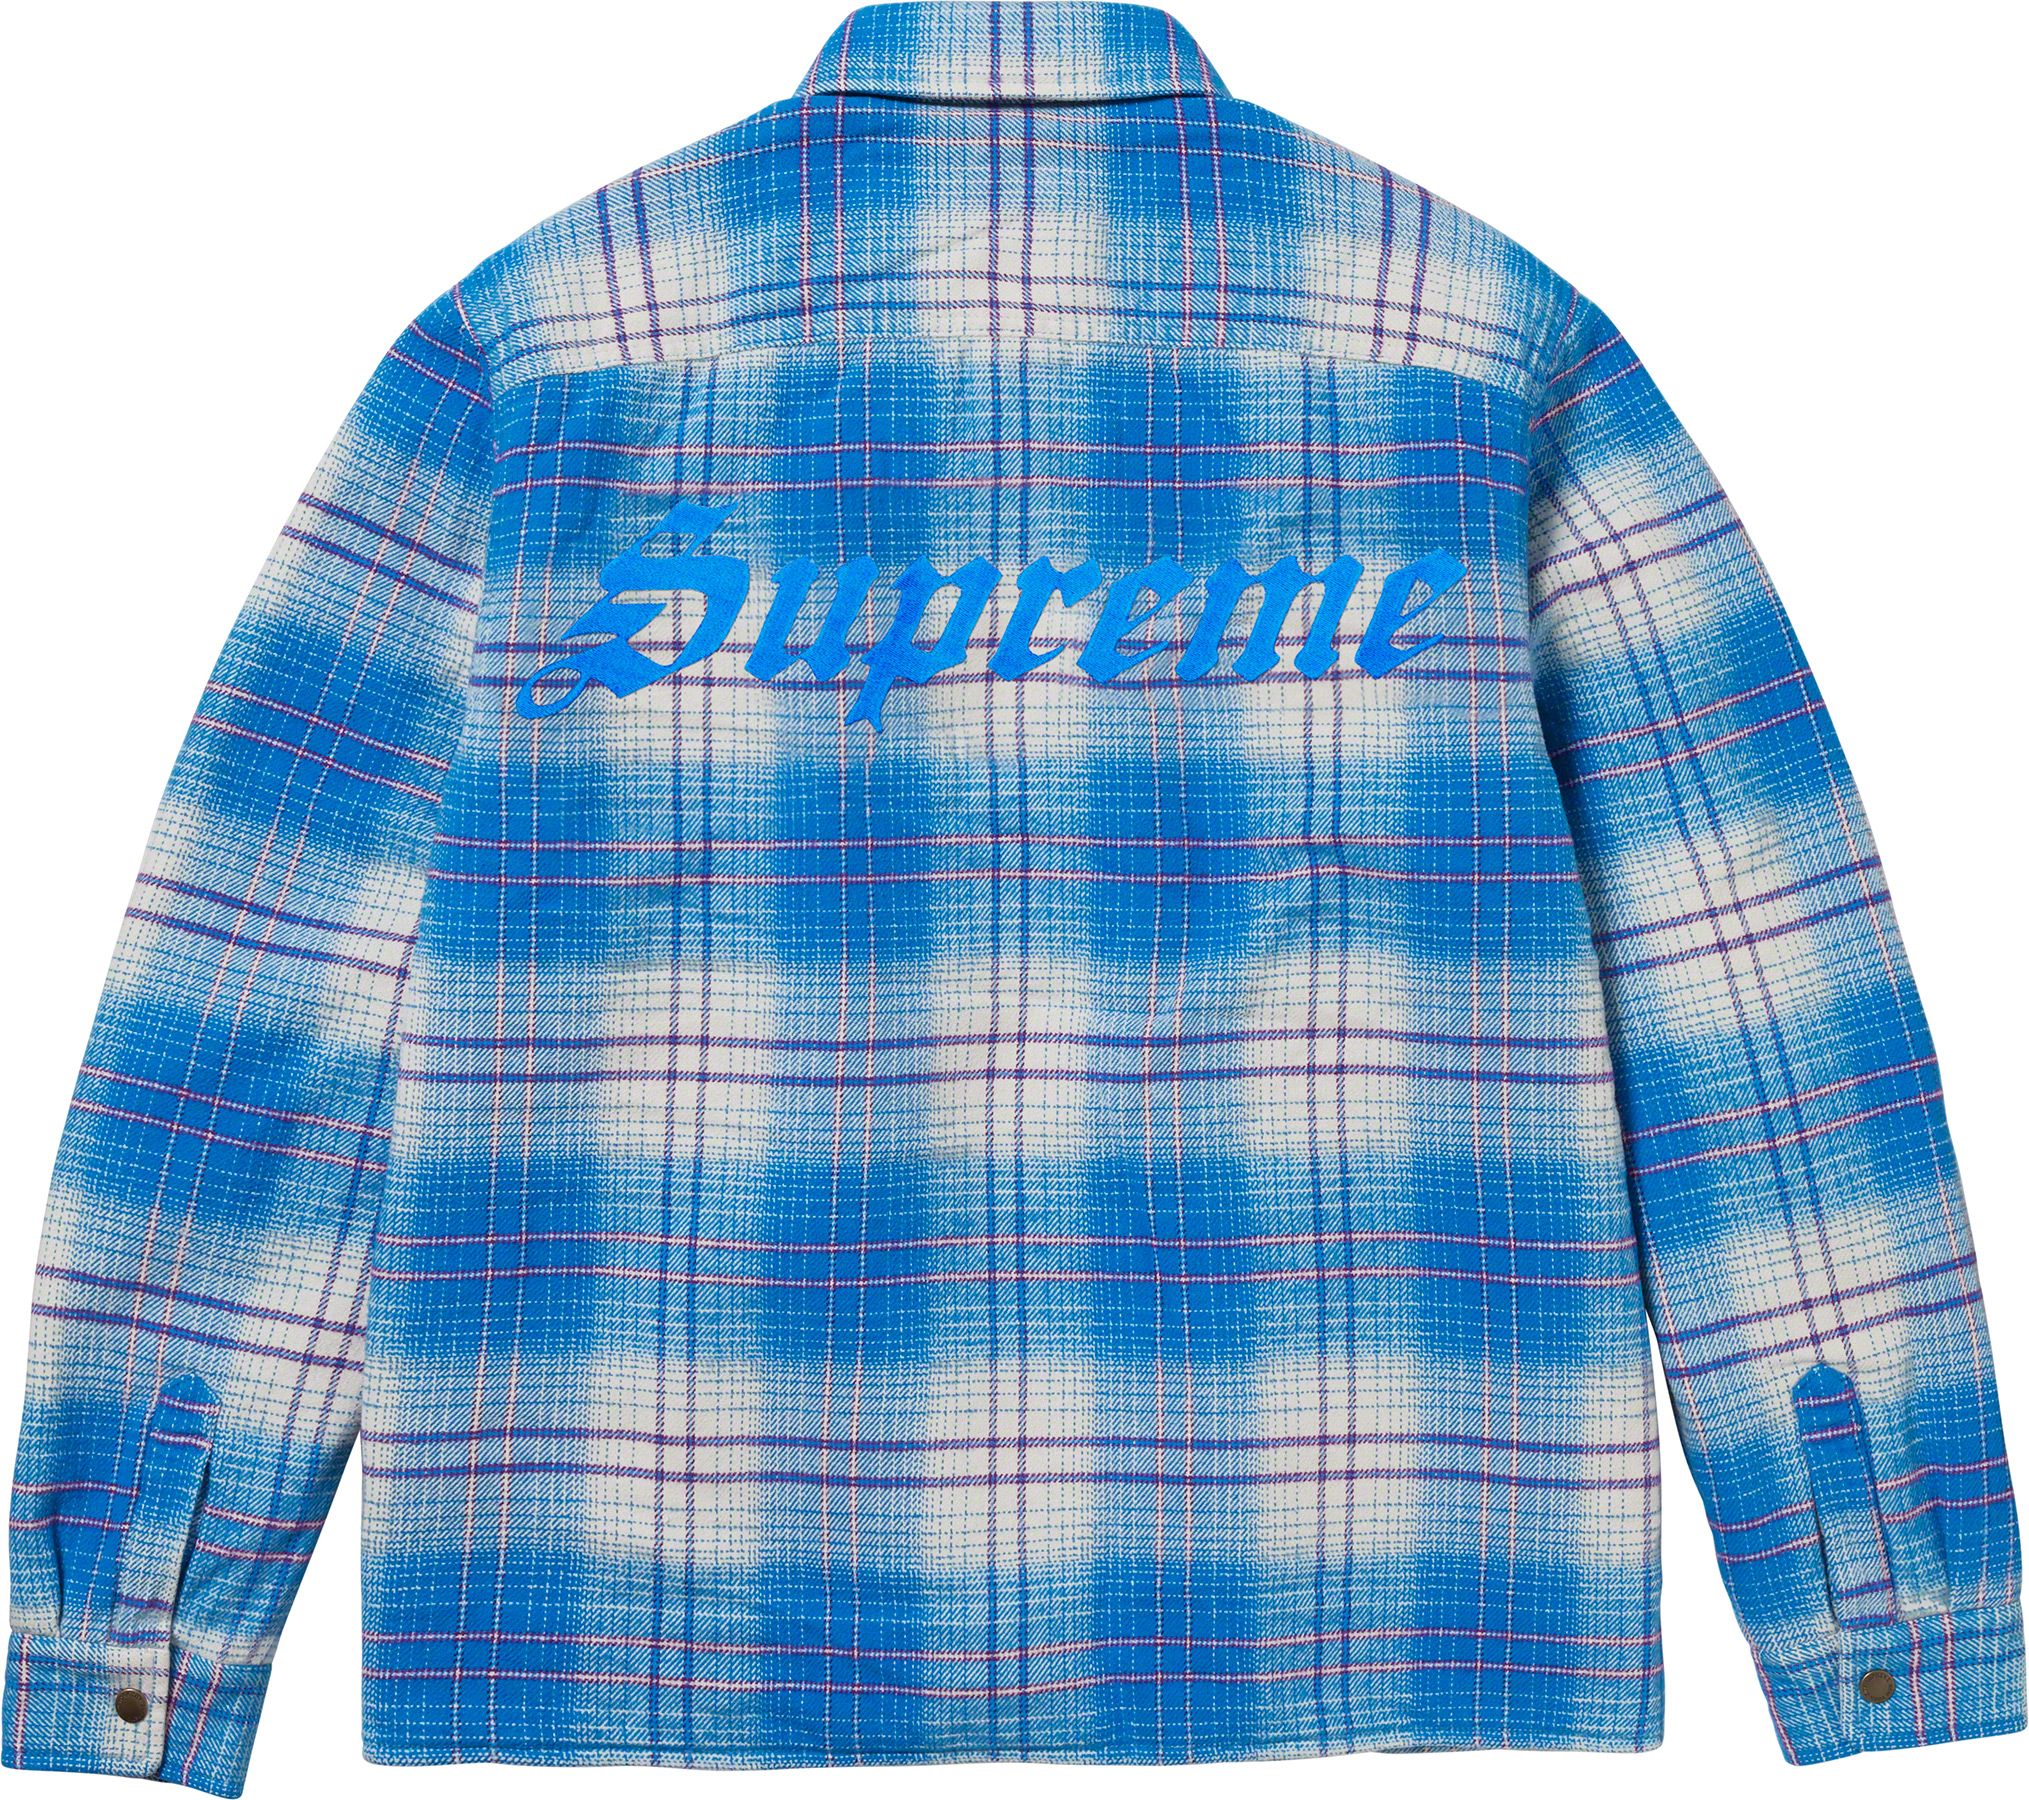 Tartan Flannel Hooded Shirt - Fall/Winter 2023 Preview – Supreme